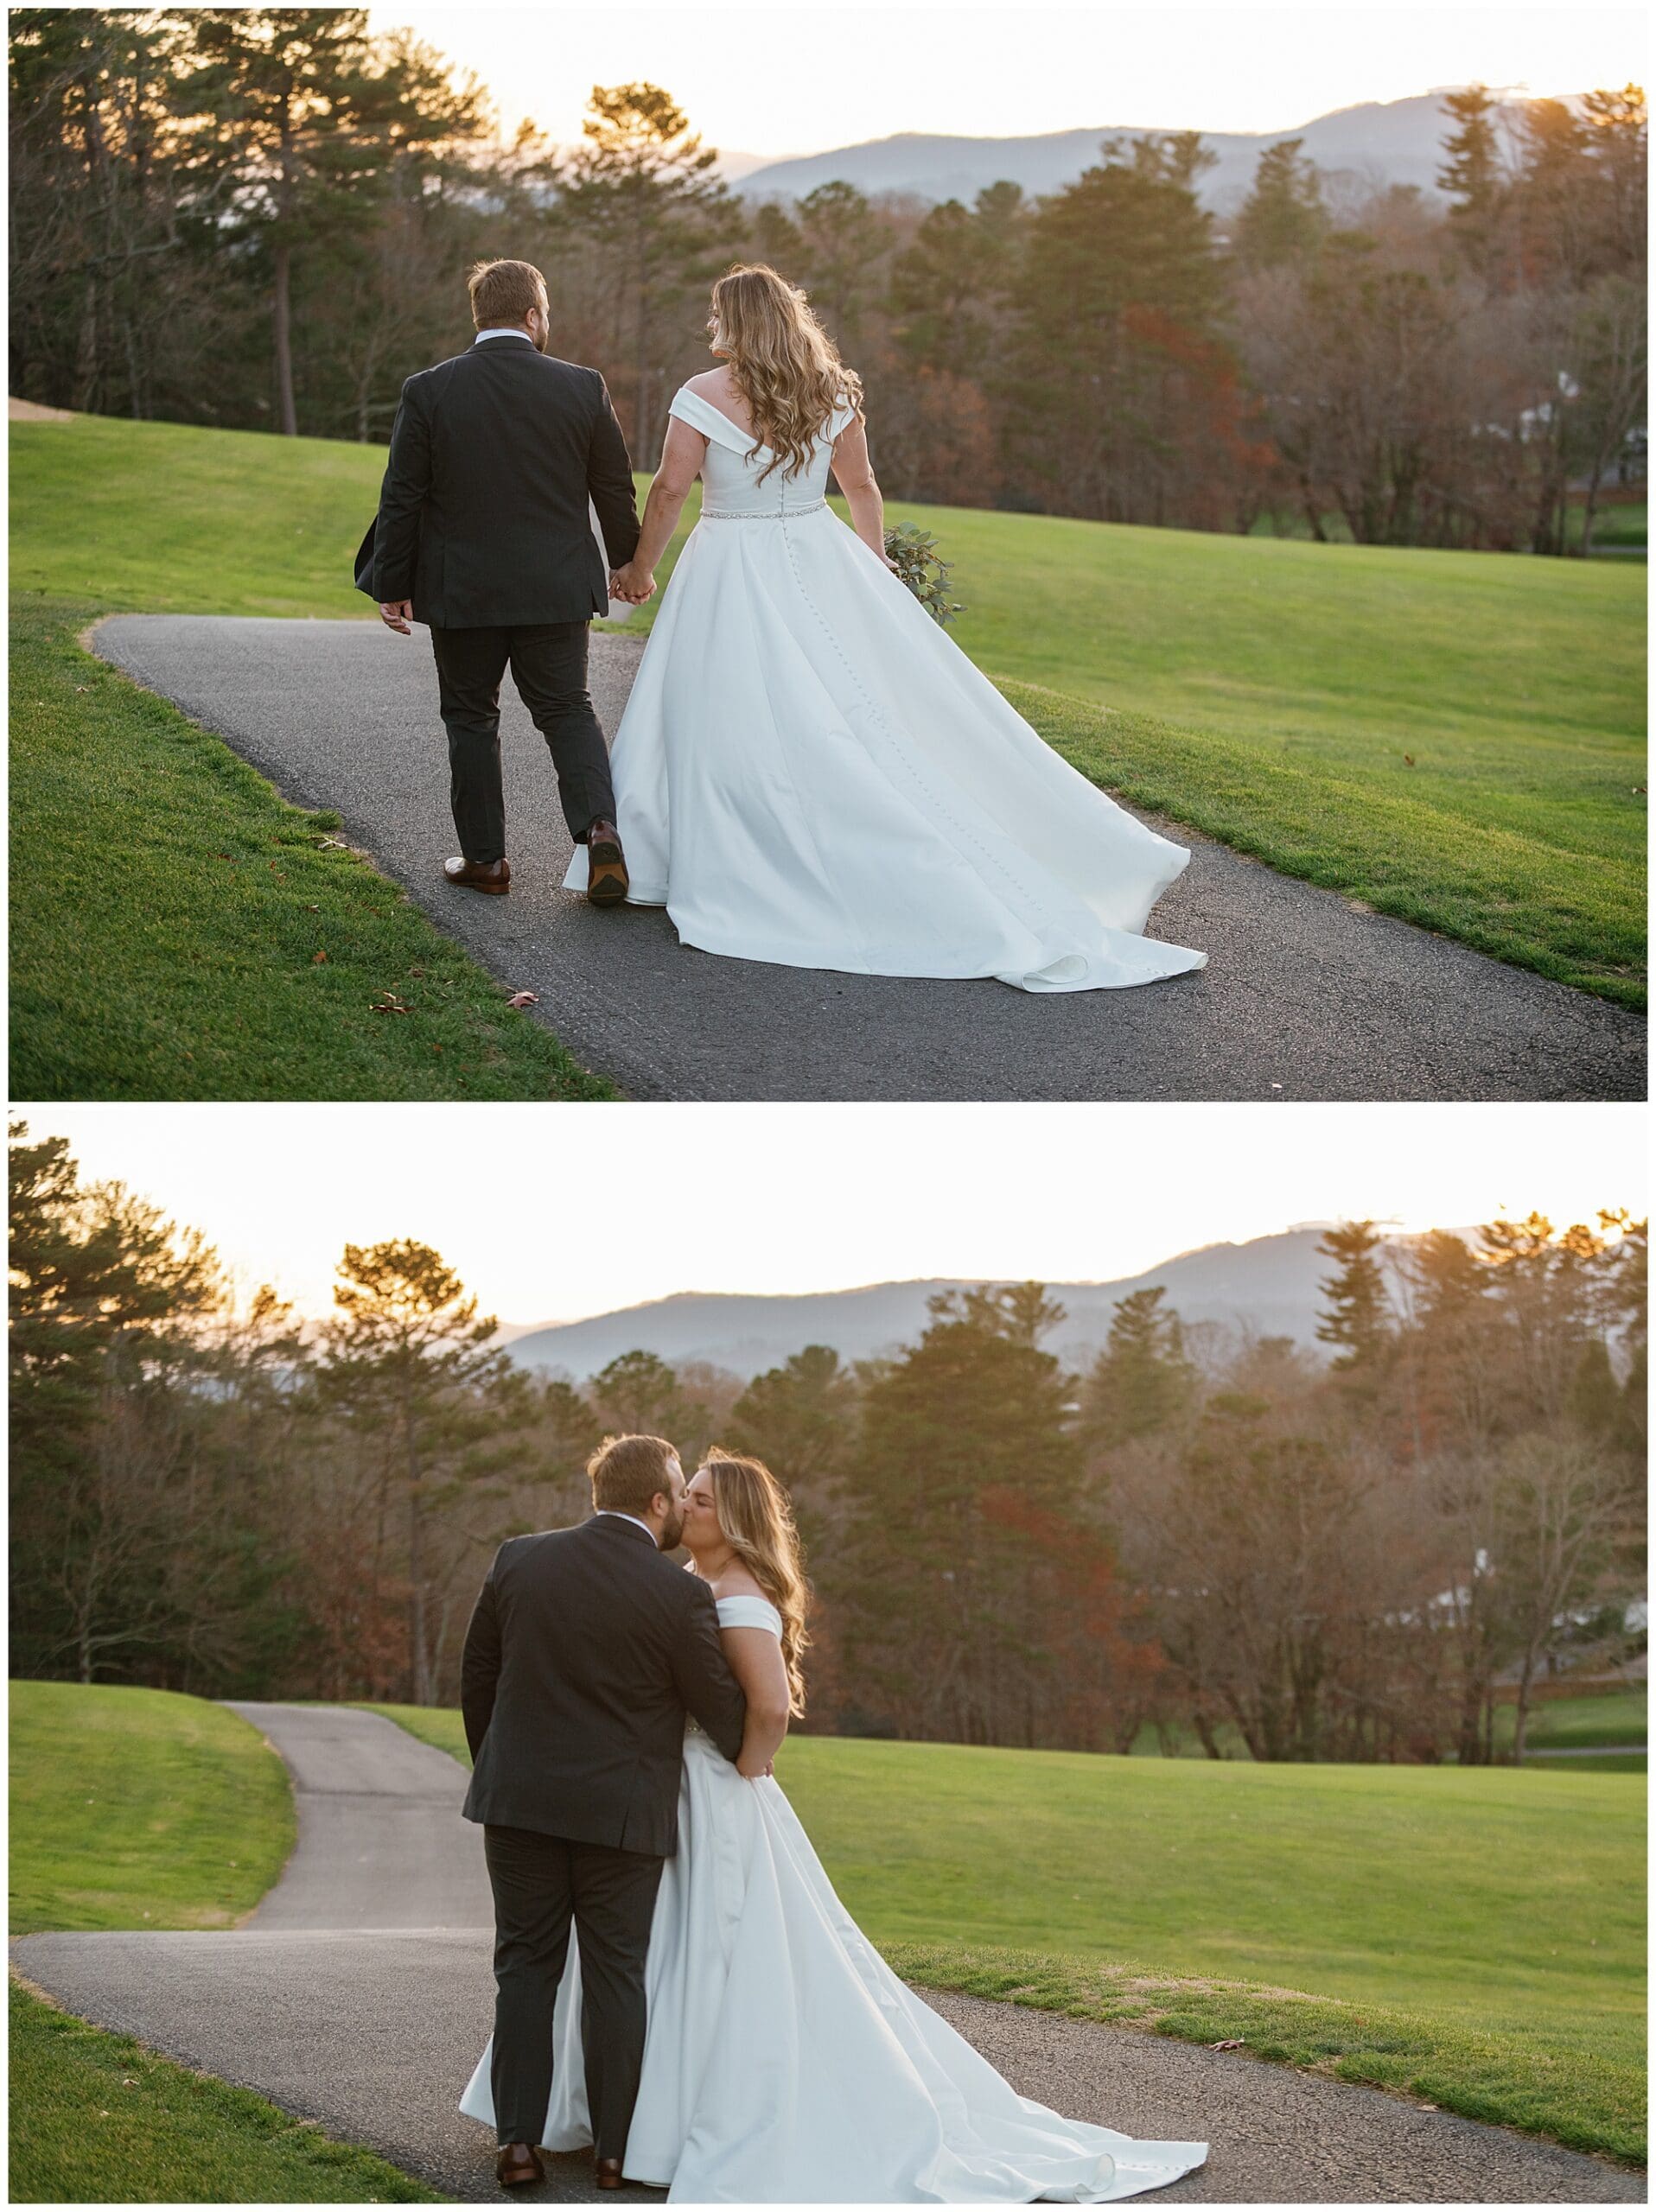 A bride and groom walking down a path at sunset.